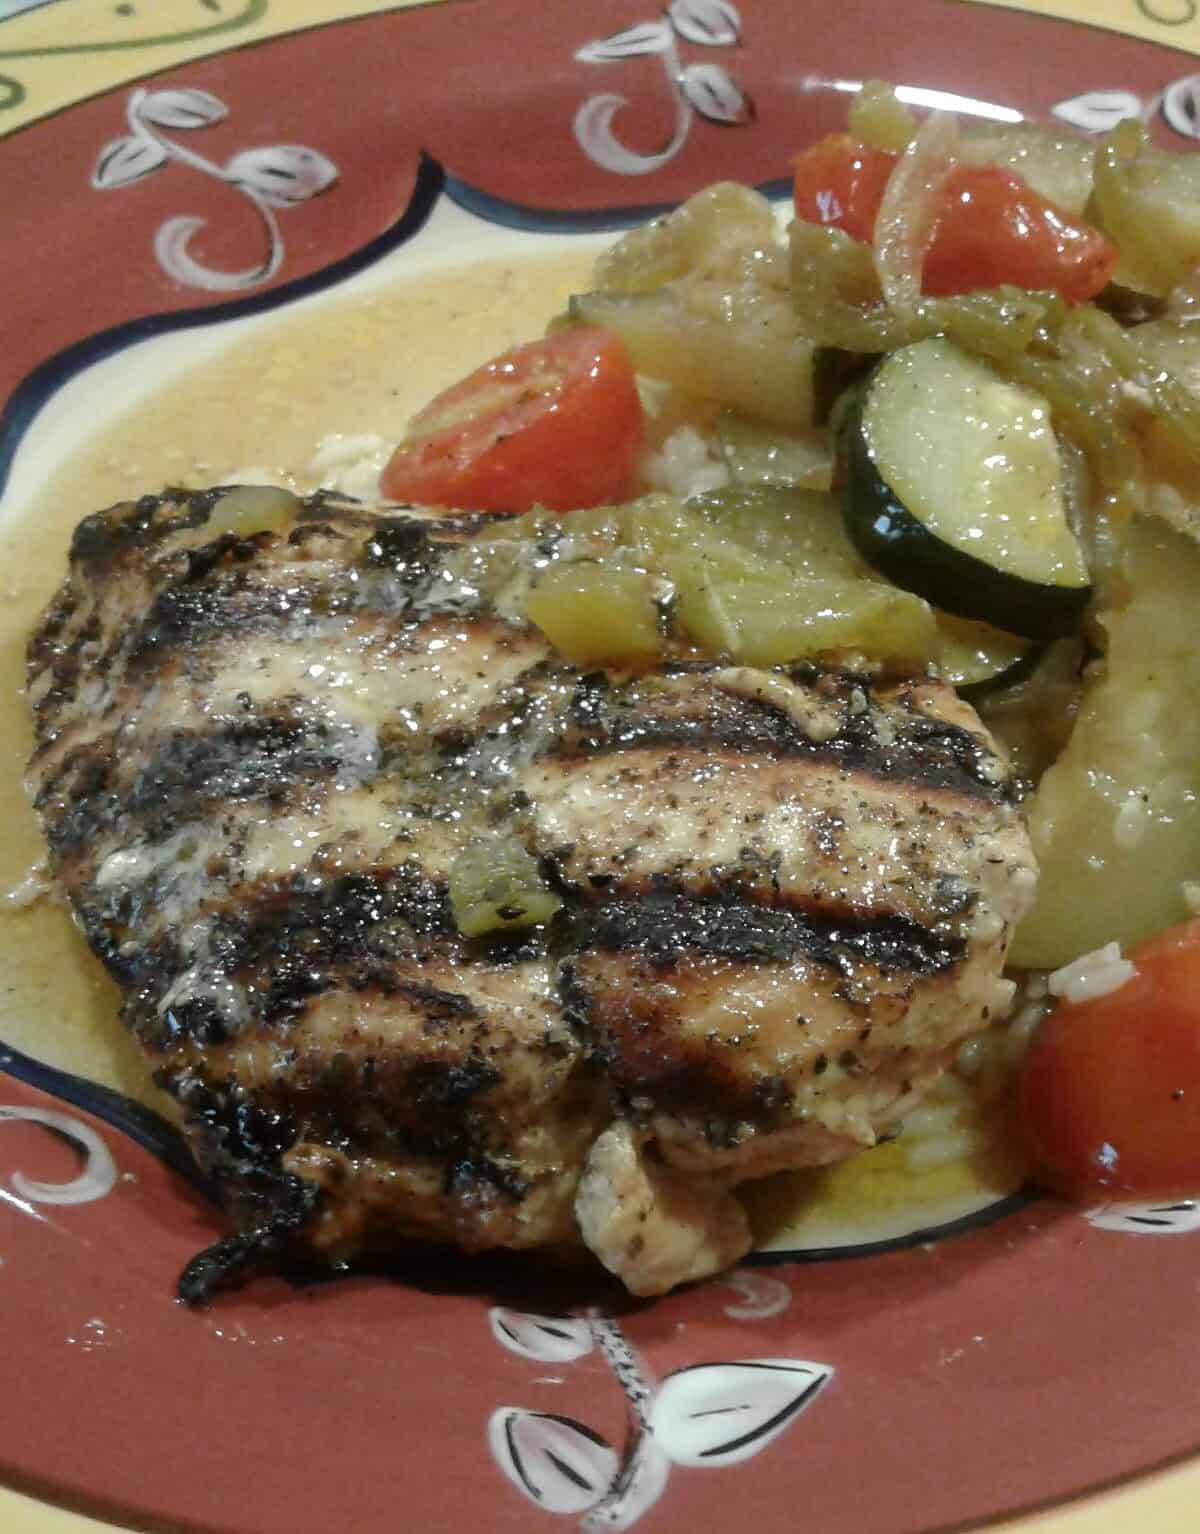 Juicy and Yummy Grilled Tampico Chicken Breast Recipe